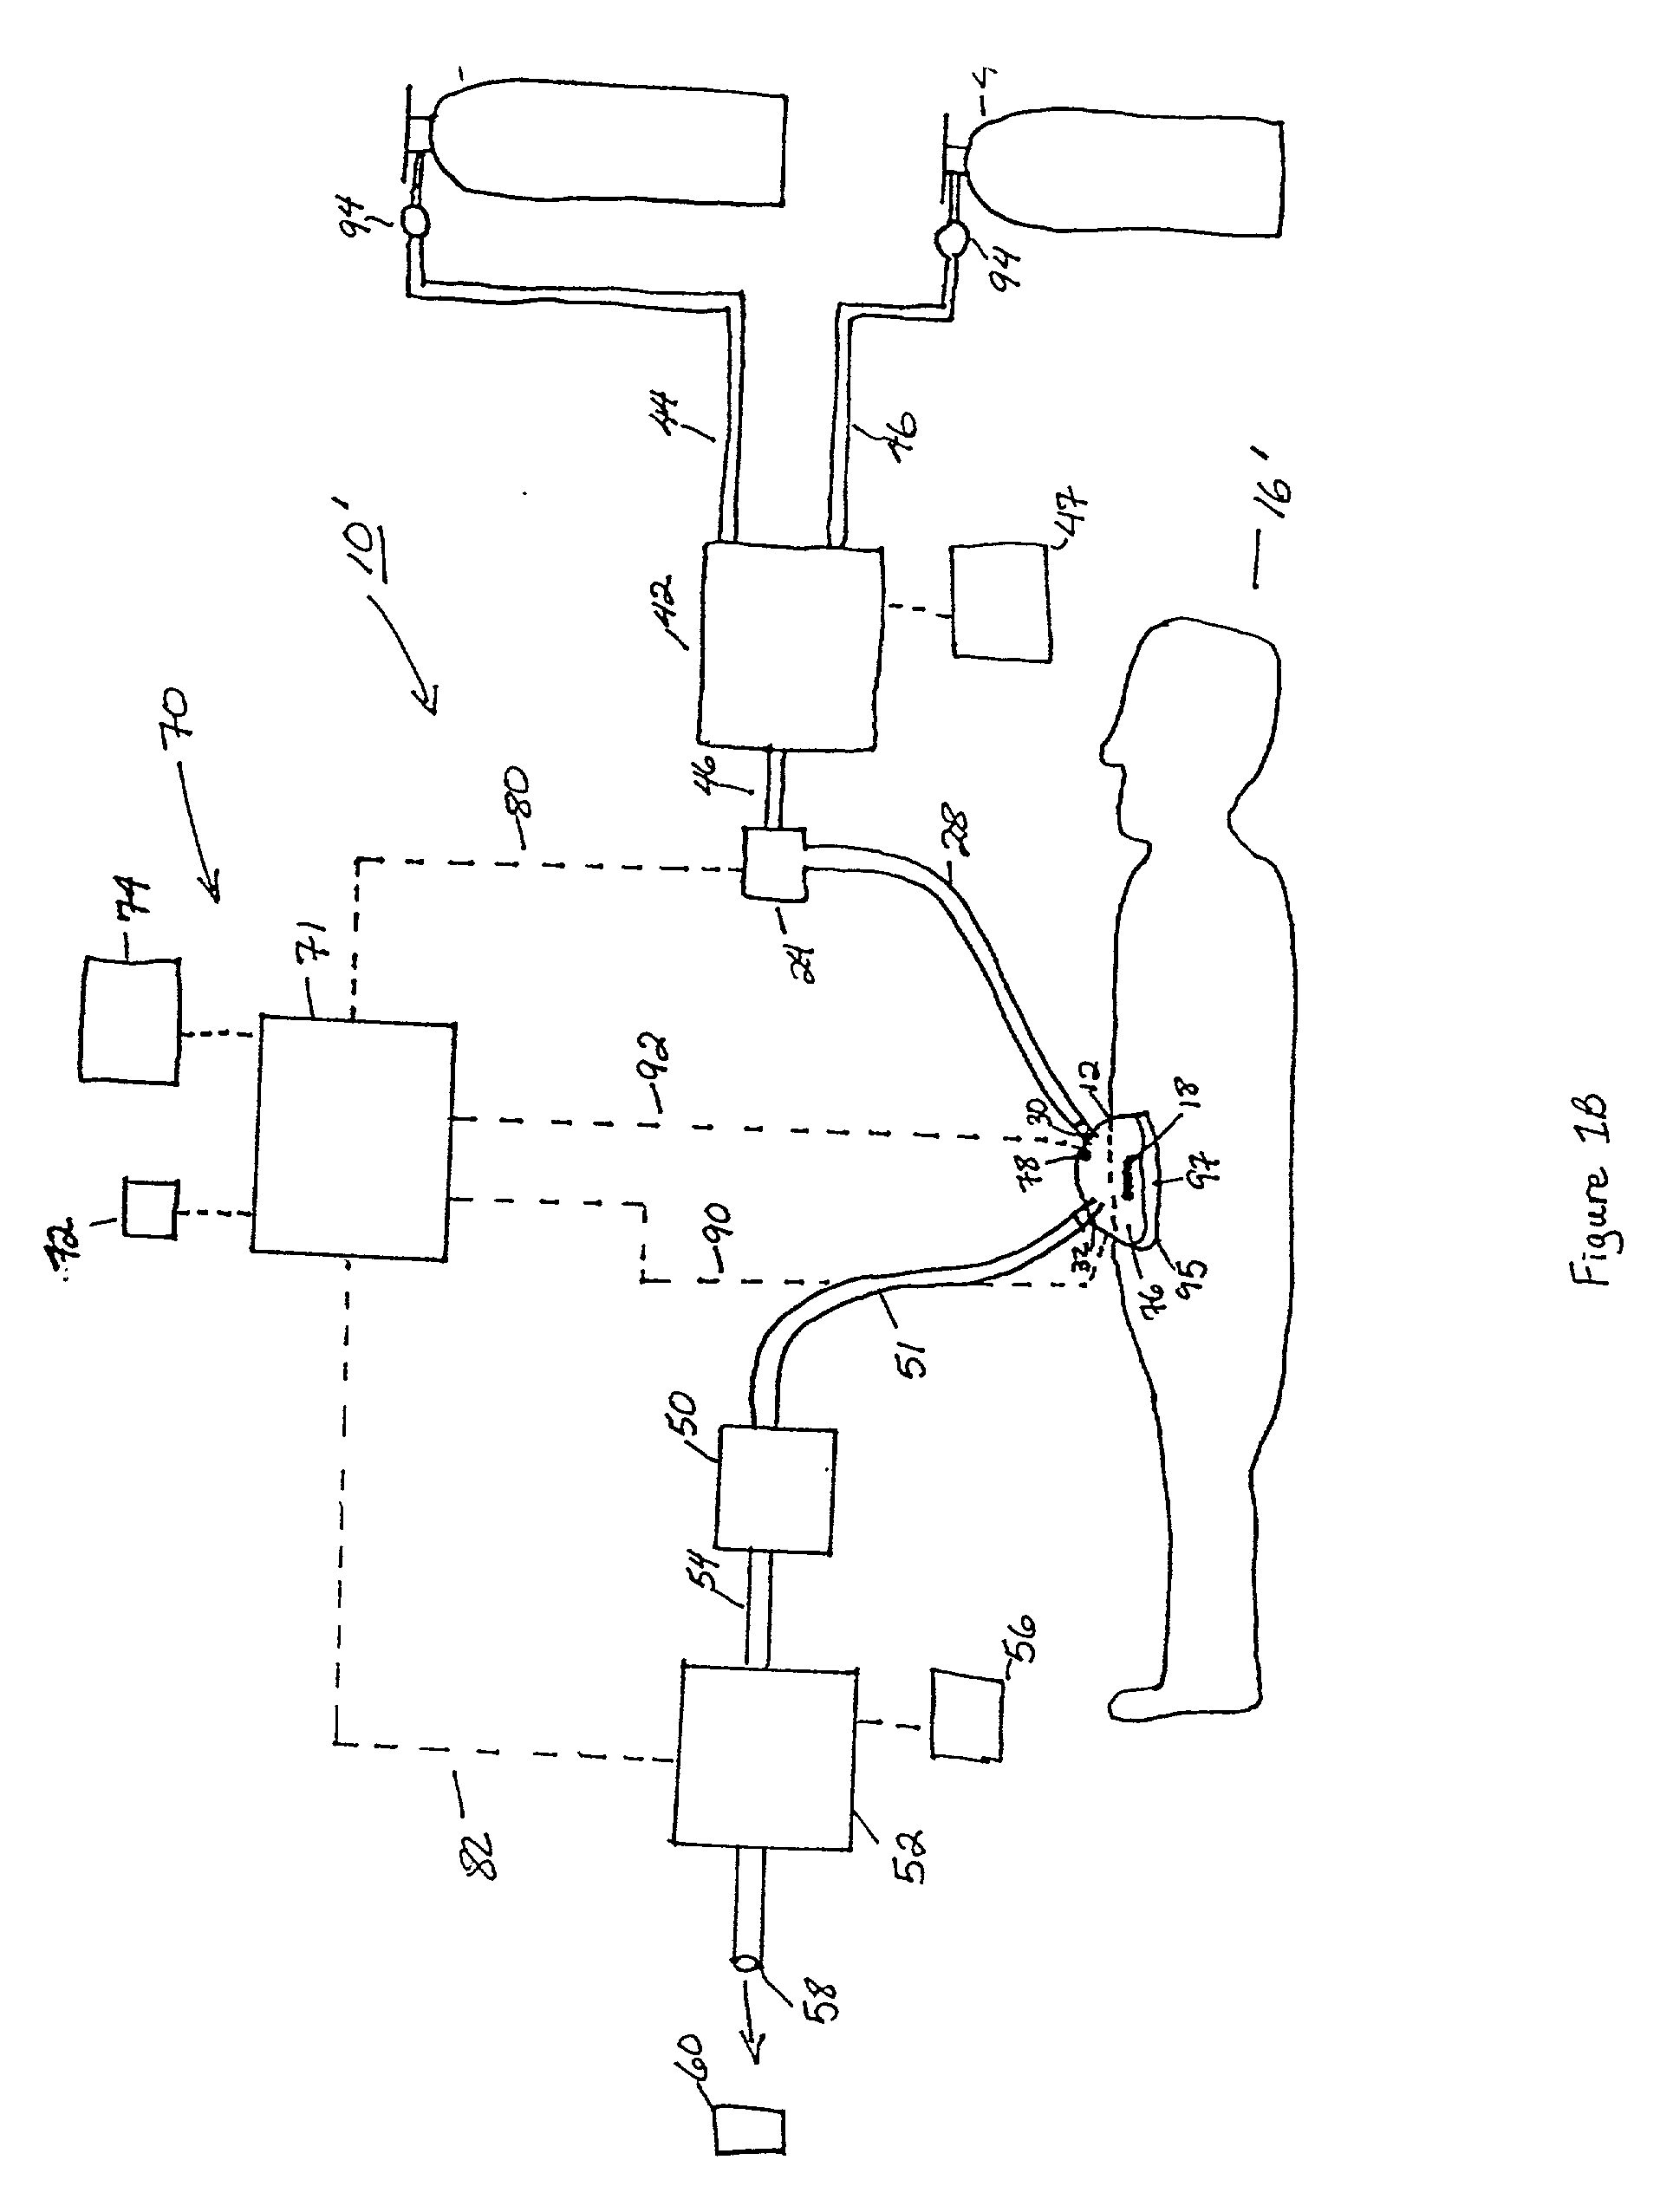 System and method for the prevention of infections in human patients using nitric oxide